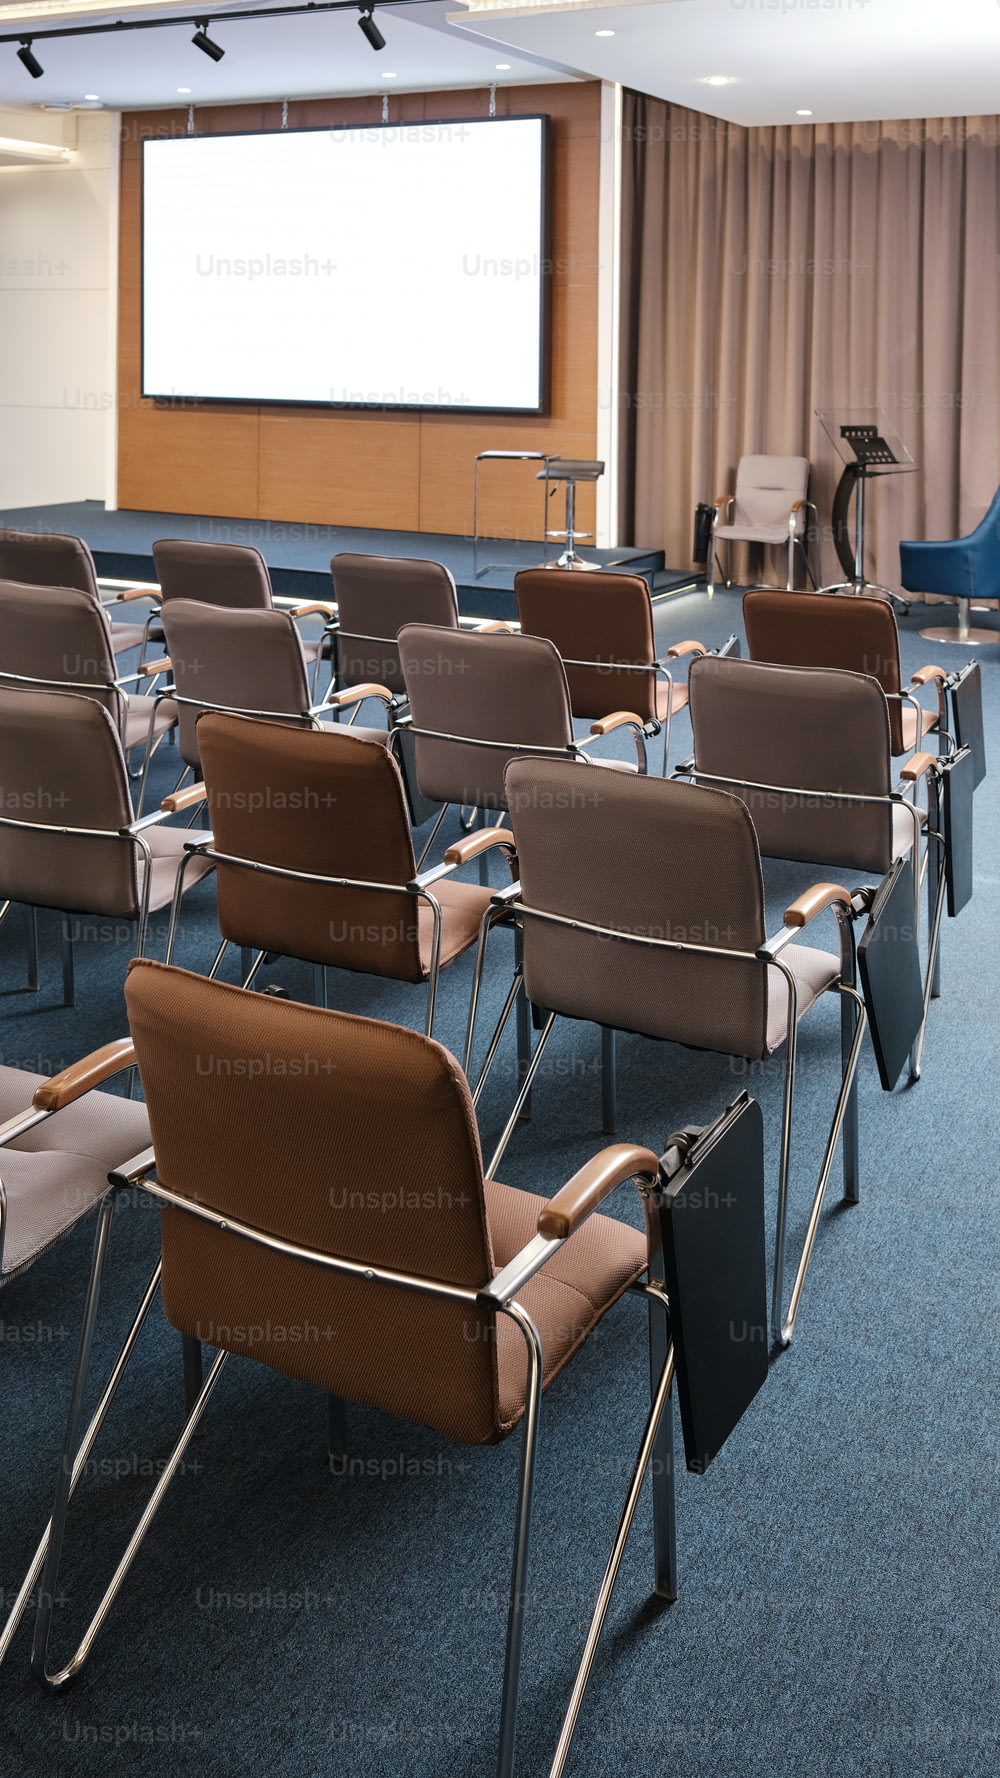 a room filled with chairs and a projector screen